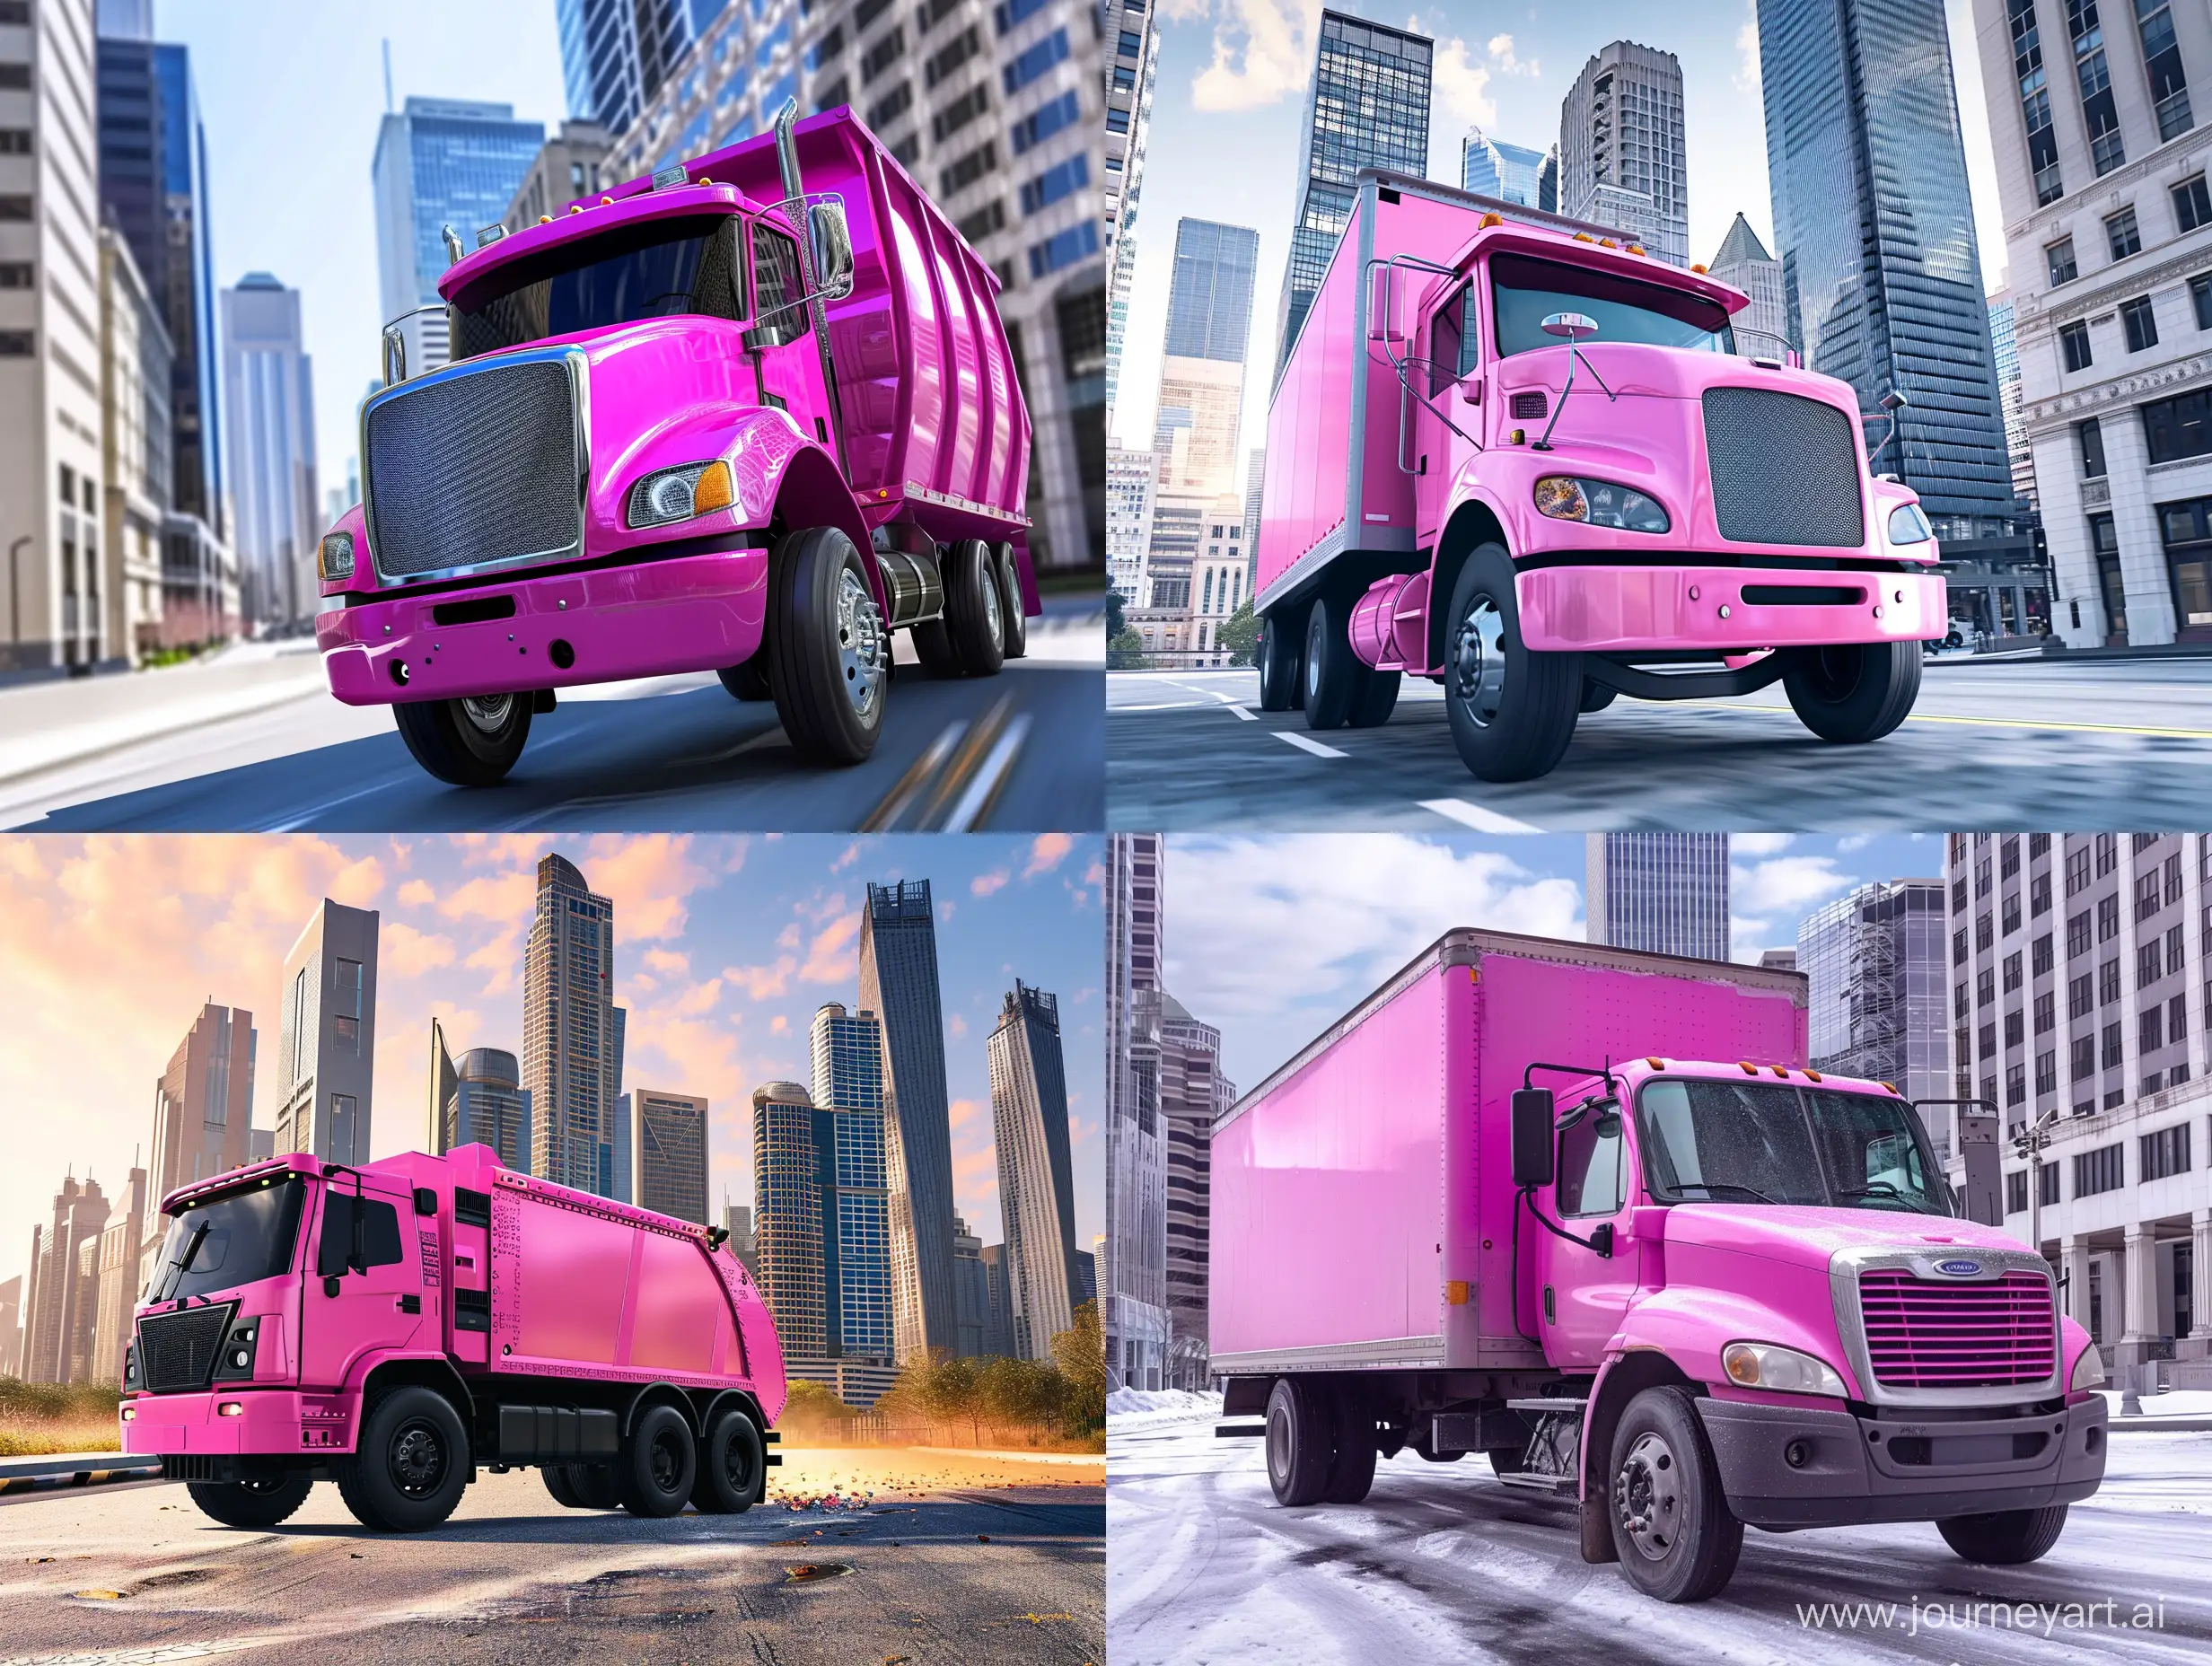 Futuristic-Pink-Cyber-Cityscape-with-Food-Recycling-Truck